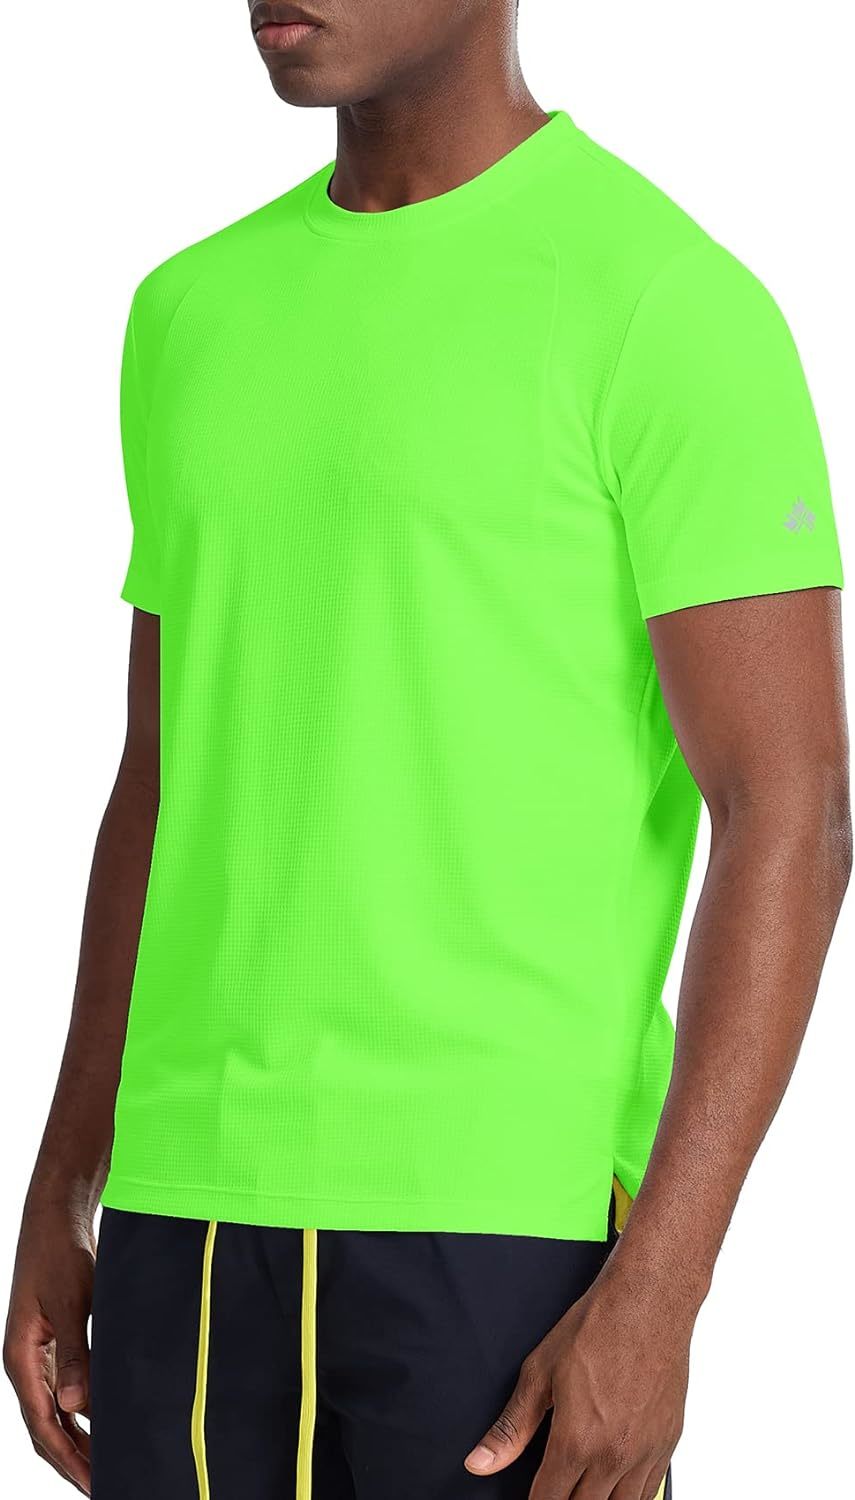 Men'S Athletic Shirts By Zengjo Quick Dry Short Sleeve T-Shirts For The Gym, - $44.99